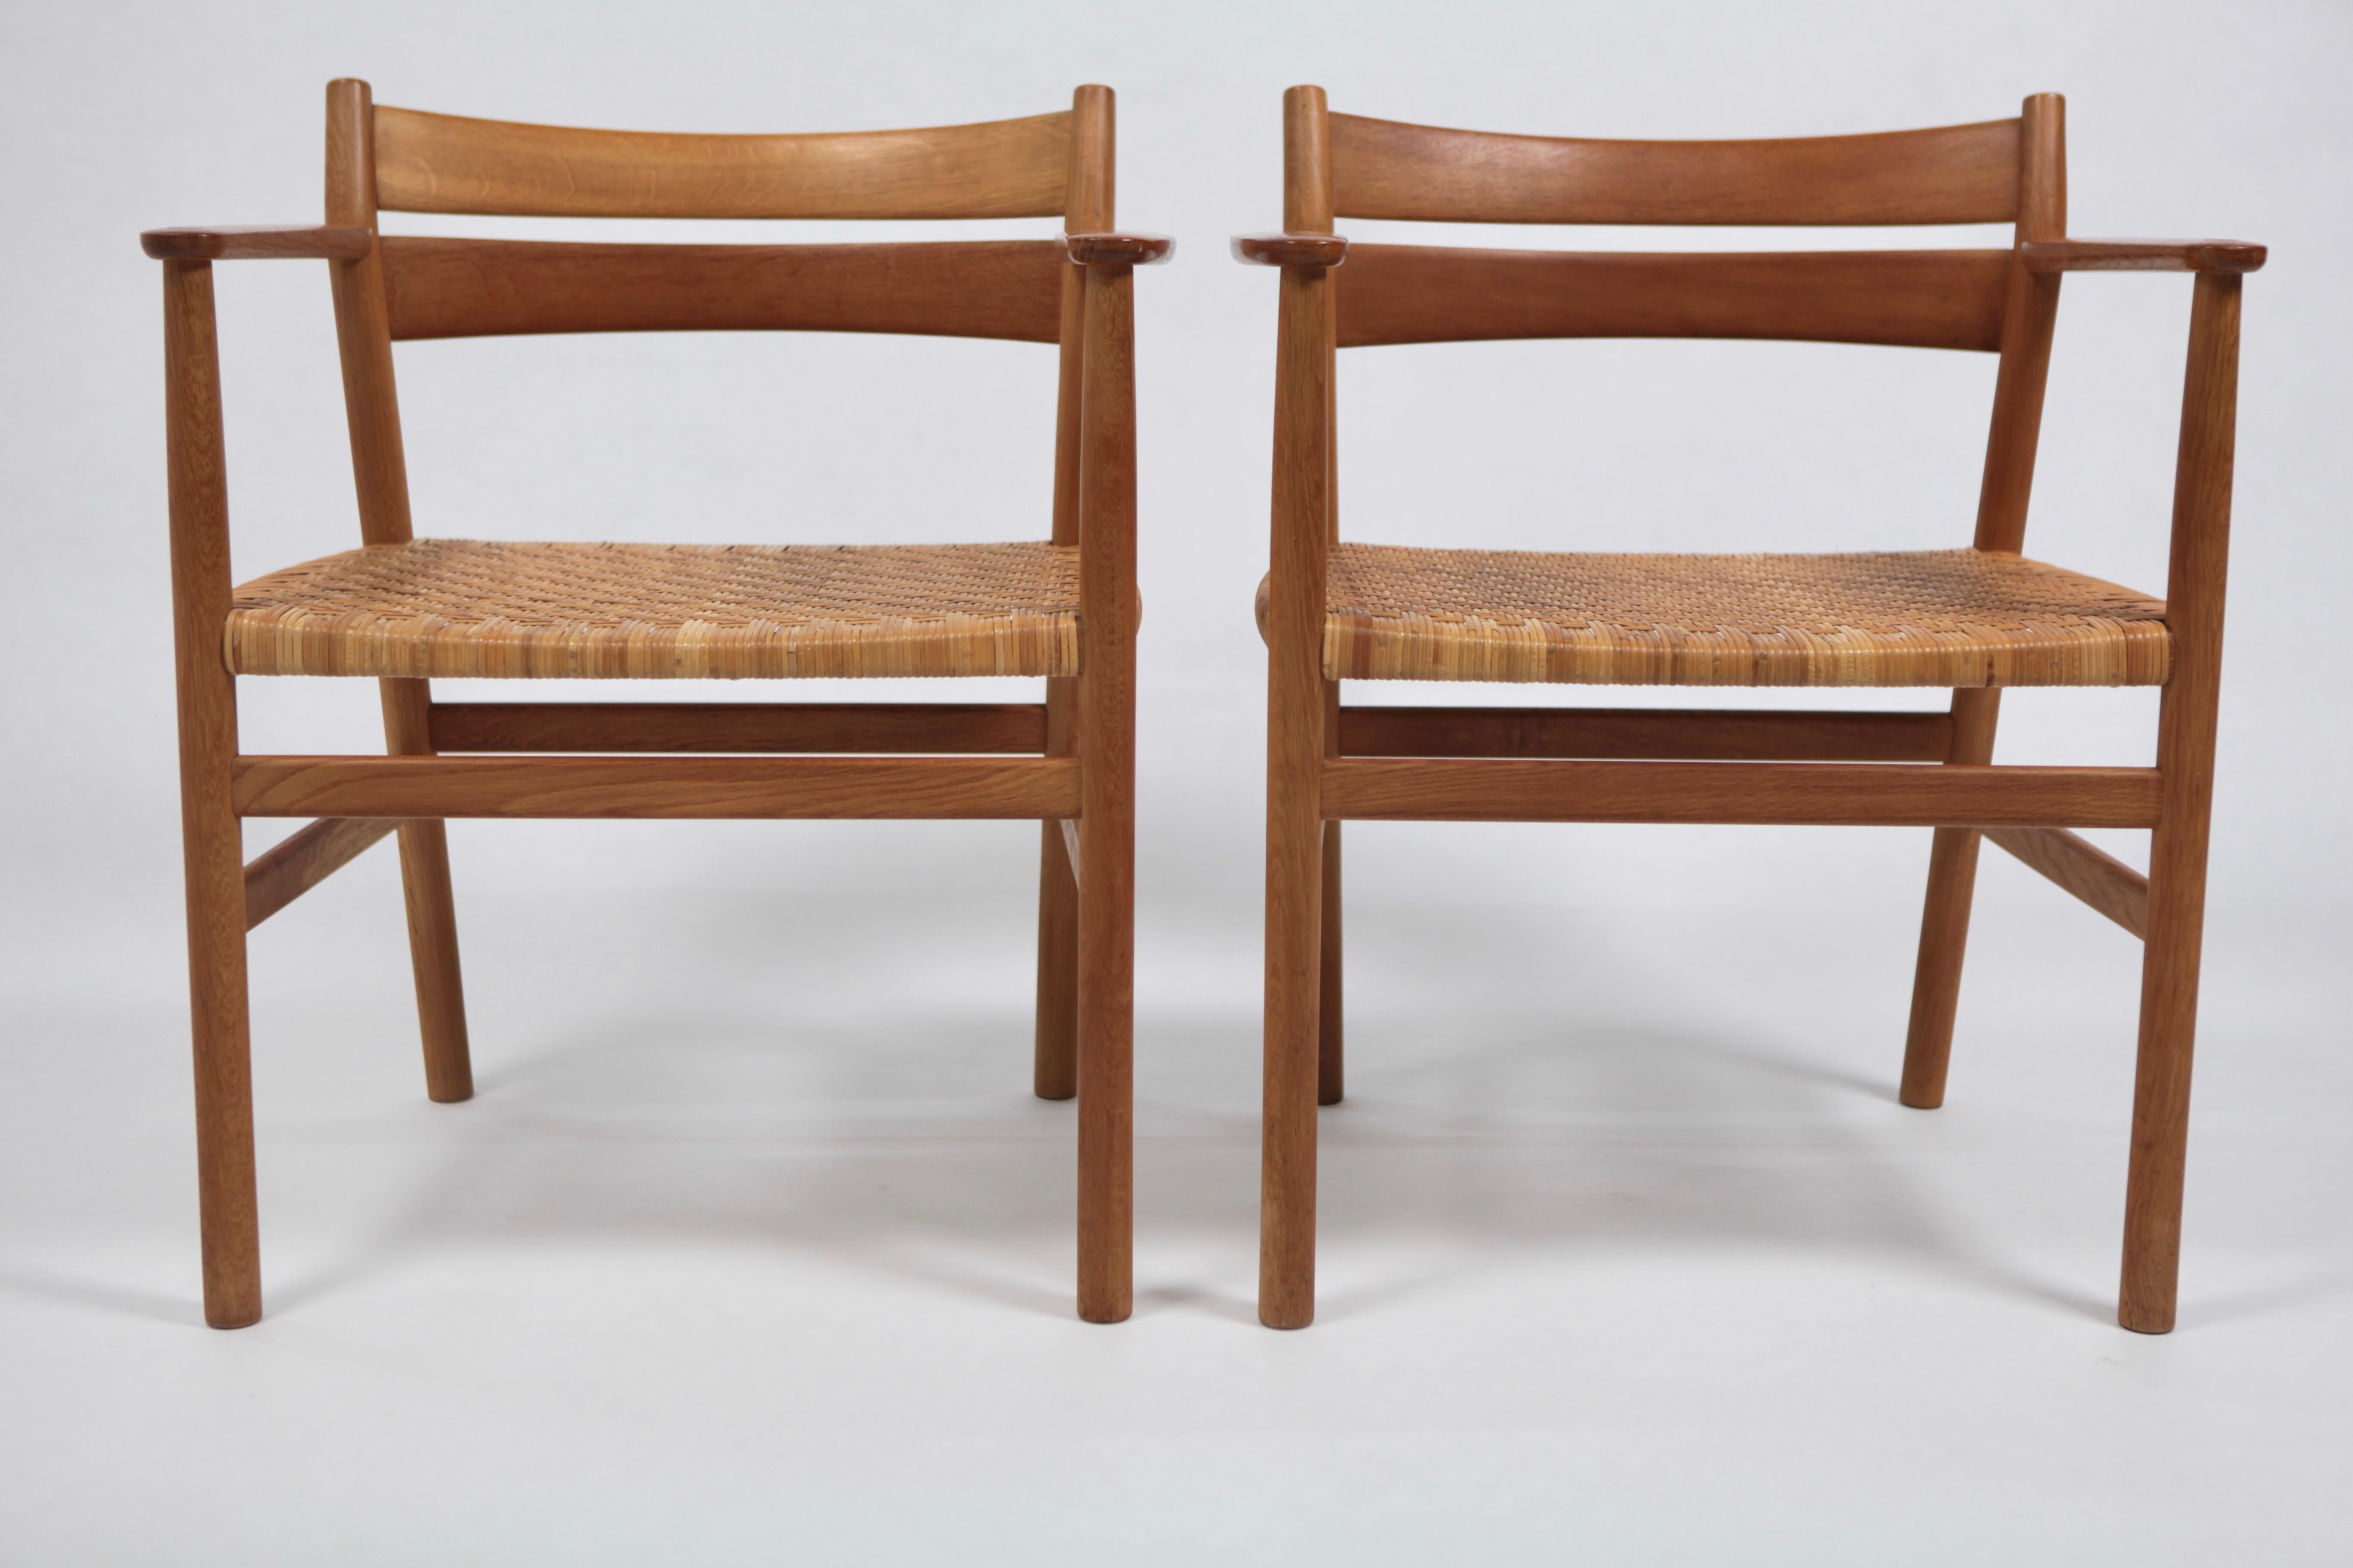 Børge Mogensen, Pair of Rare 'BM1' Armchairs in Oak and Cane, Sweden, 1960s For Sale 10